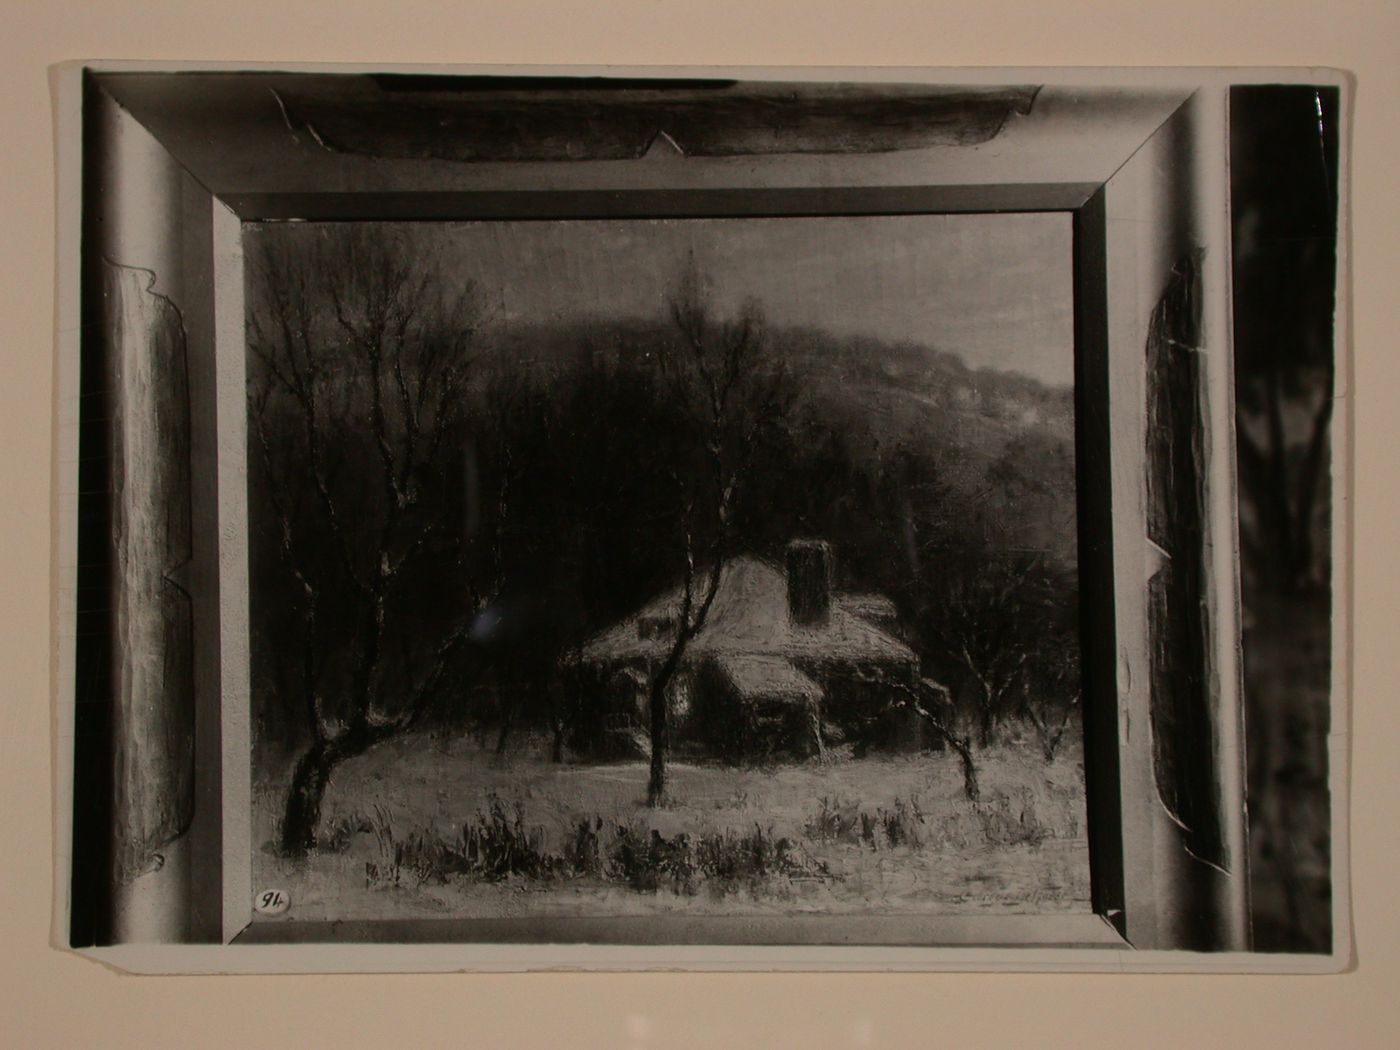 Photograph of a painting of a house in winter